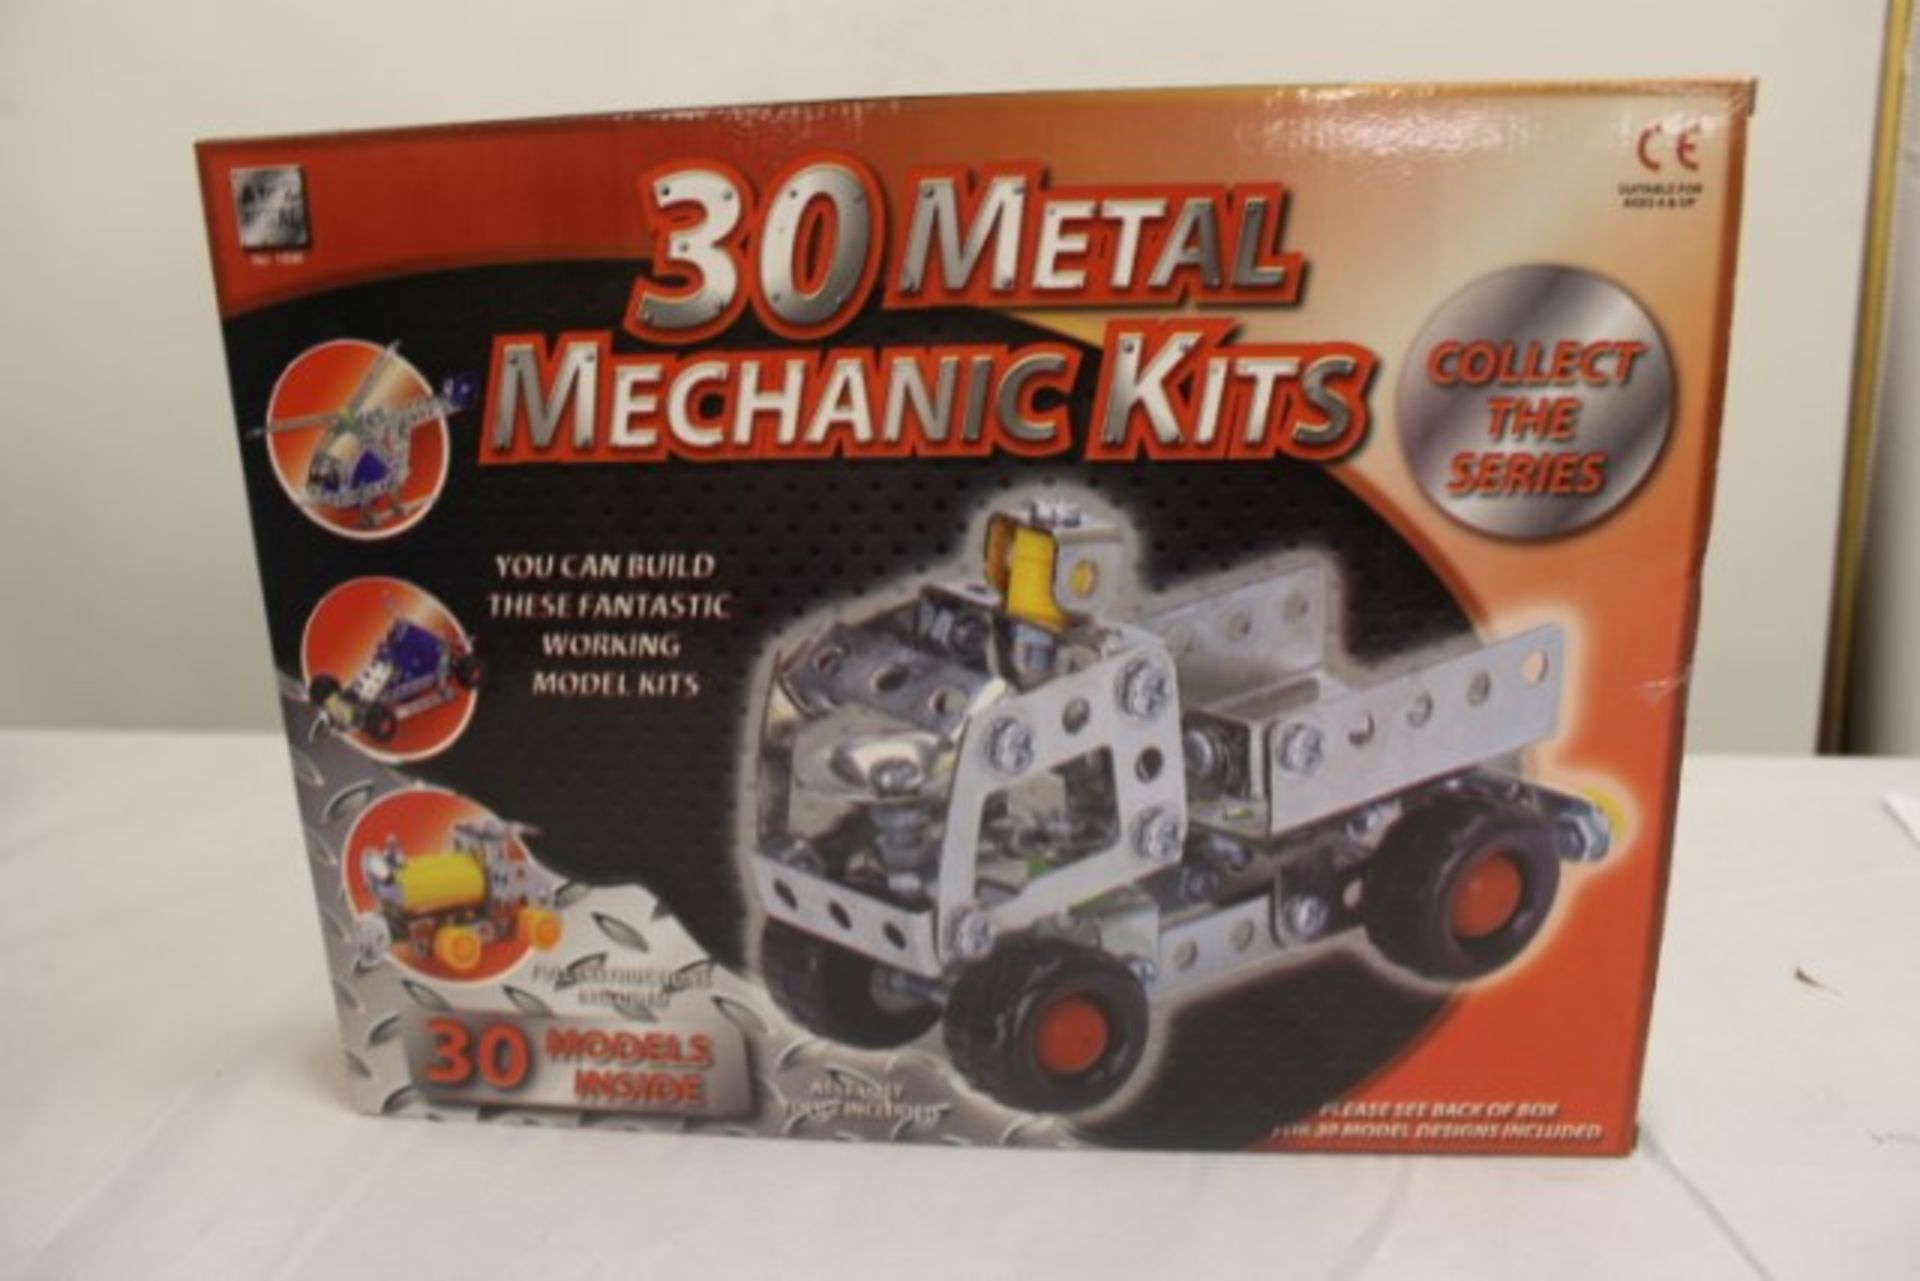 V *TRADE QTY* Brand New 30 Model Metal Mechanics Kit (Makes 30 Different Models) Fits With Meccano X